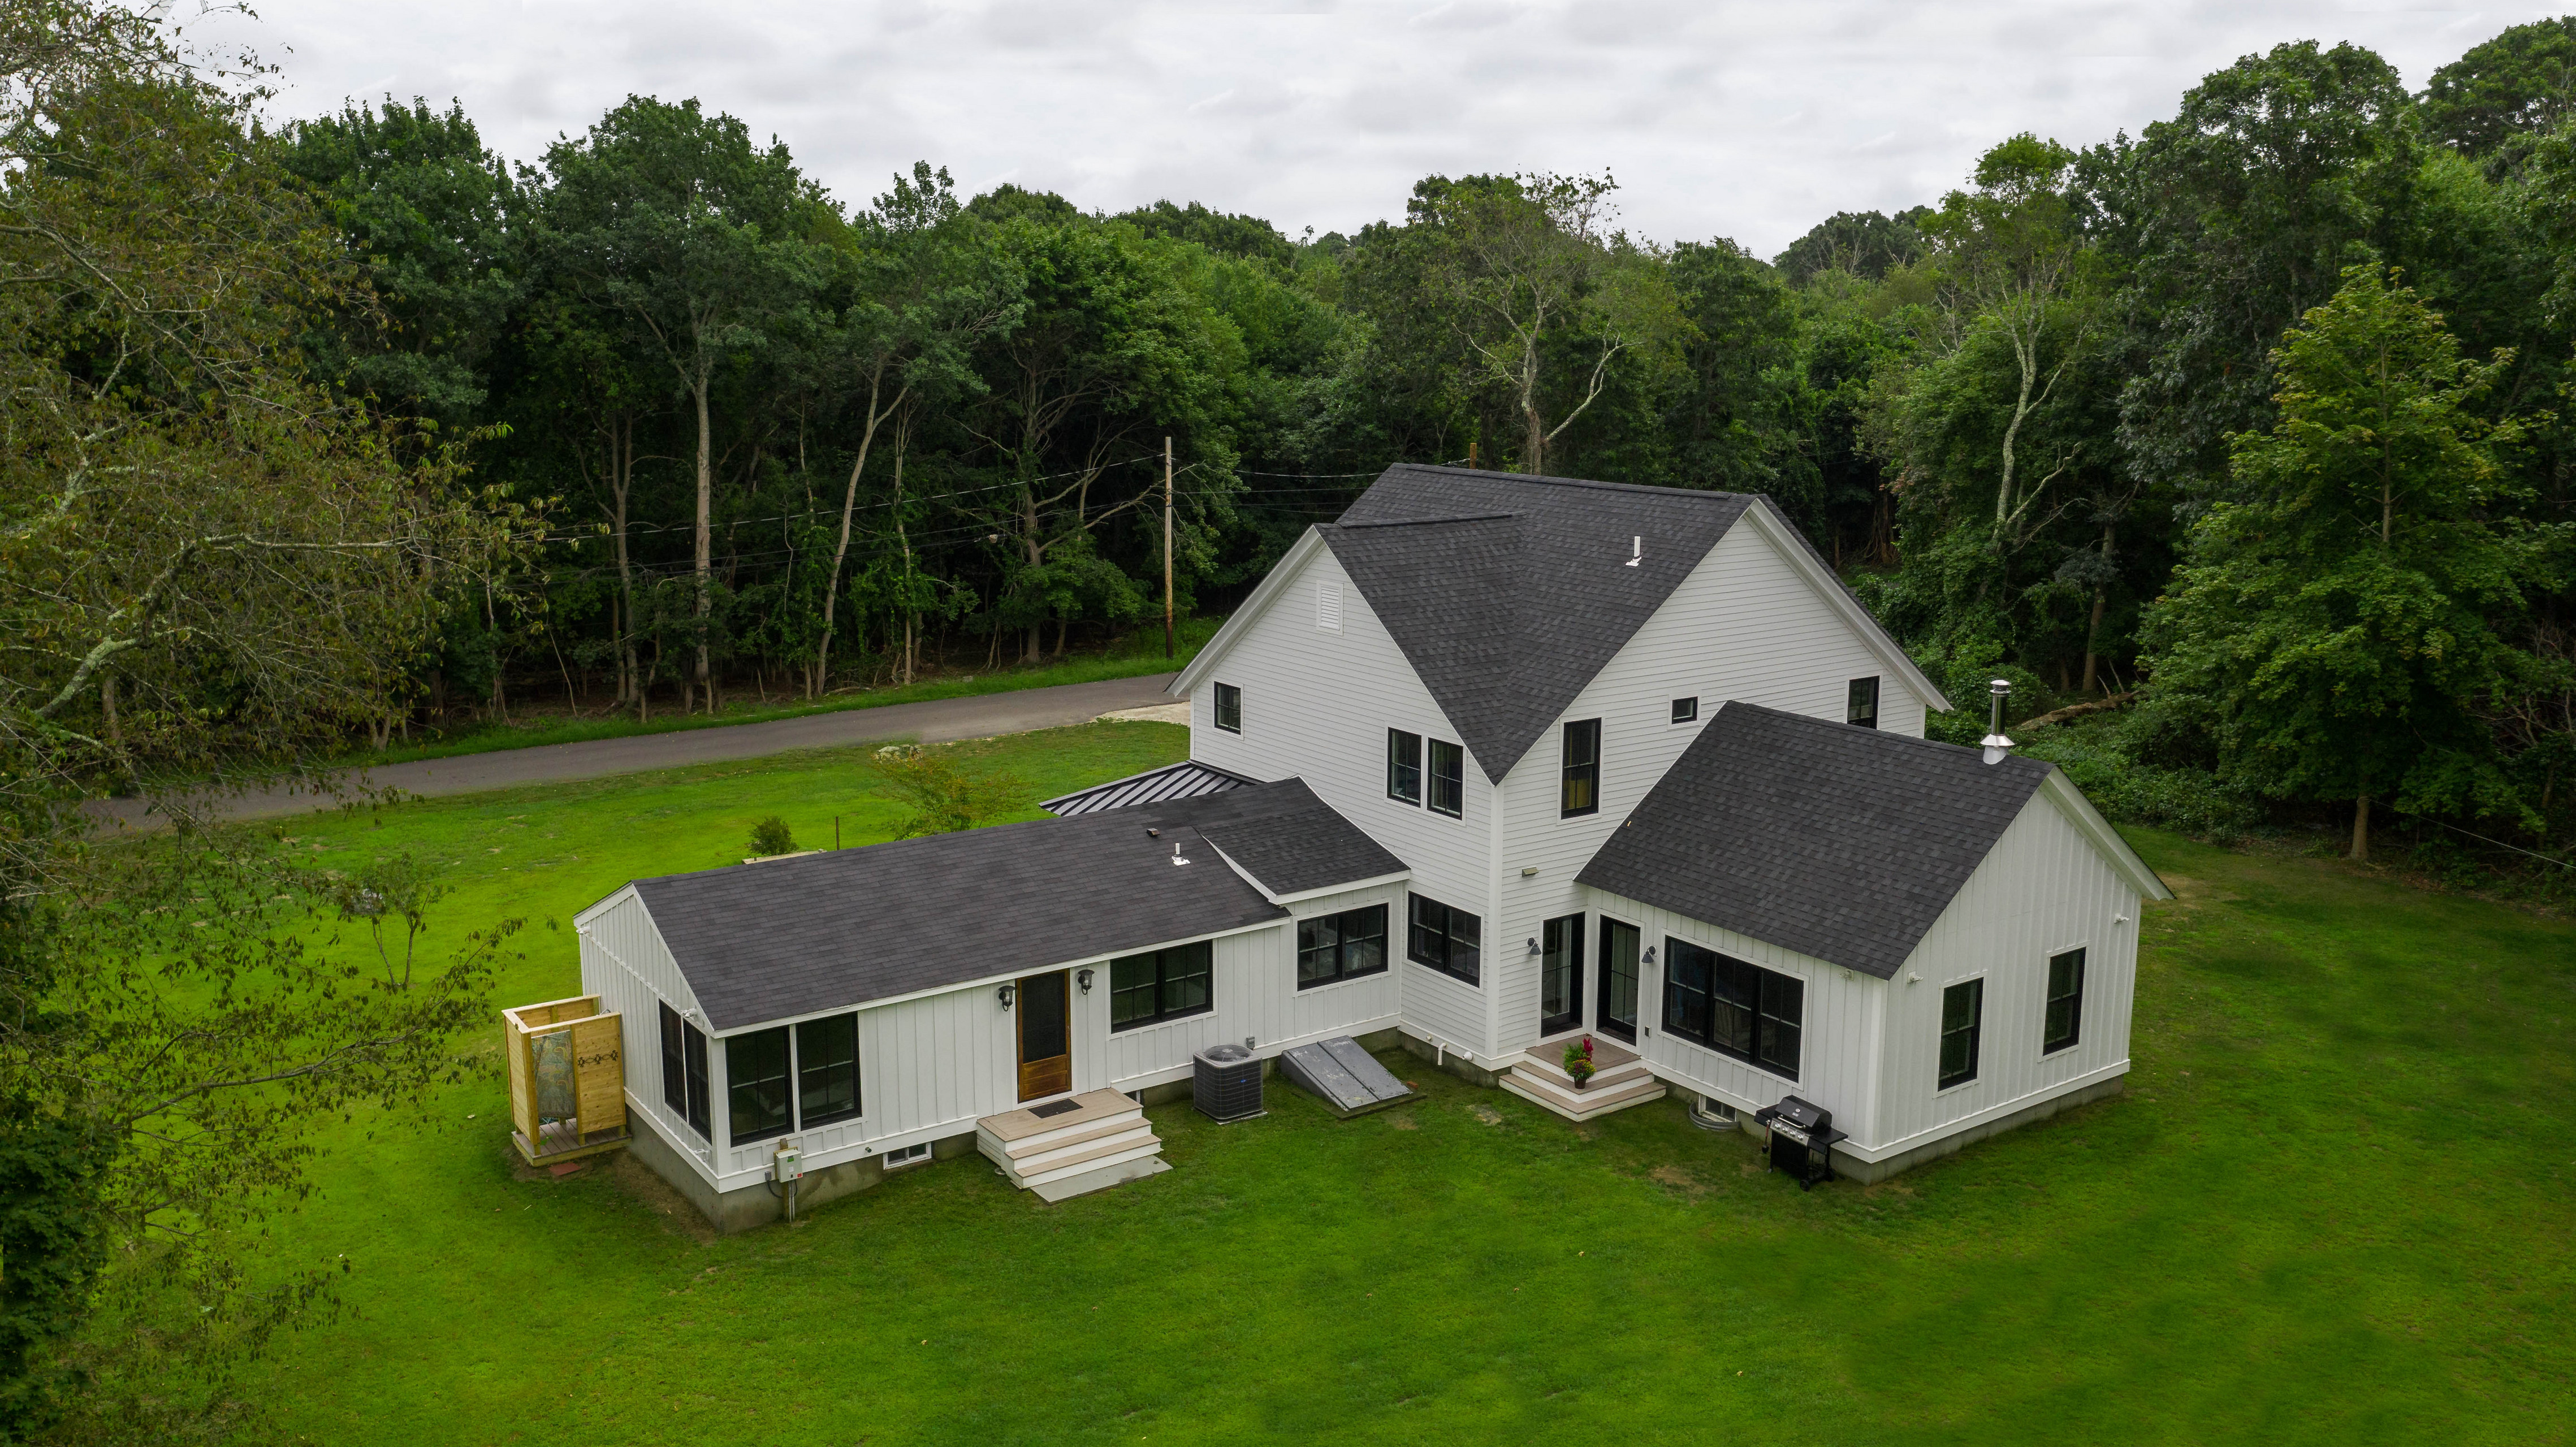 Modern Farmhouse with Cross Gable Roof 1st Floor master suite and great  room - Farmhouse - Exterior - Bridgeport - by CONNECTICUT VALLEY HOMES and  RI MODULAR HOMES | Houzz